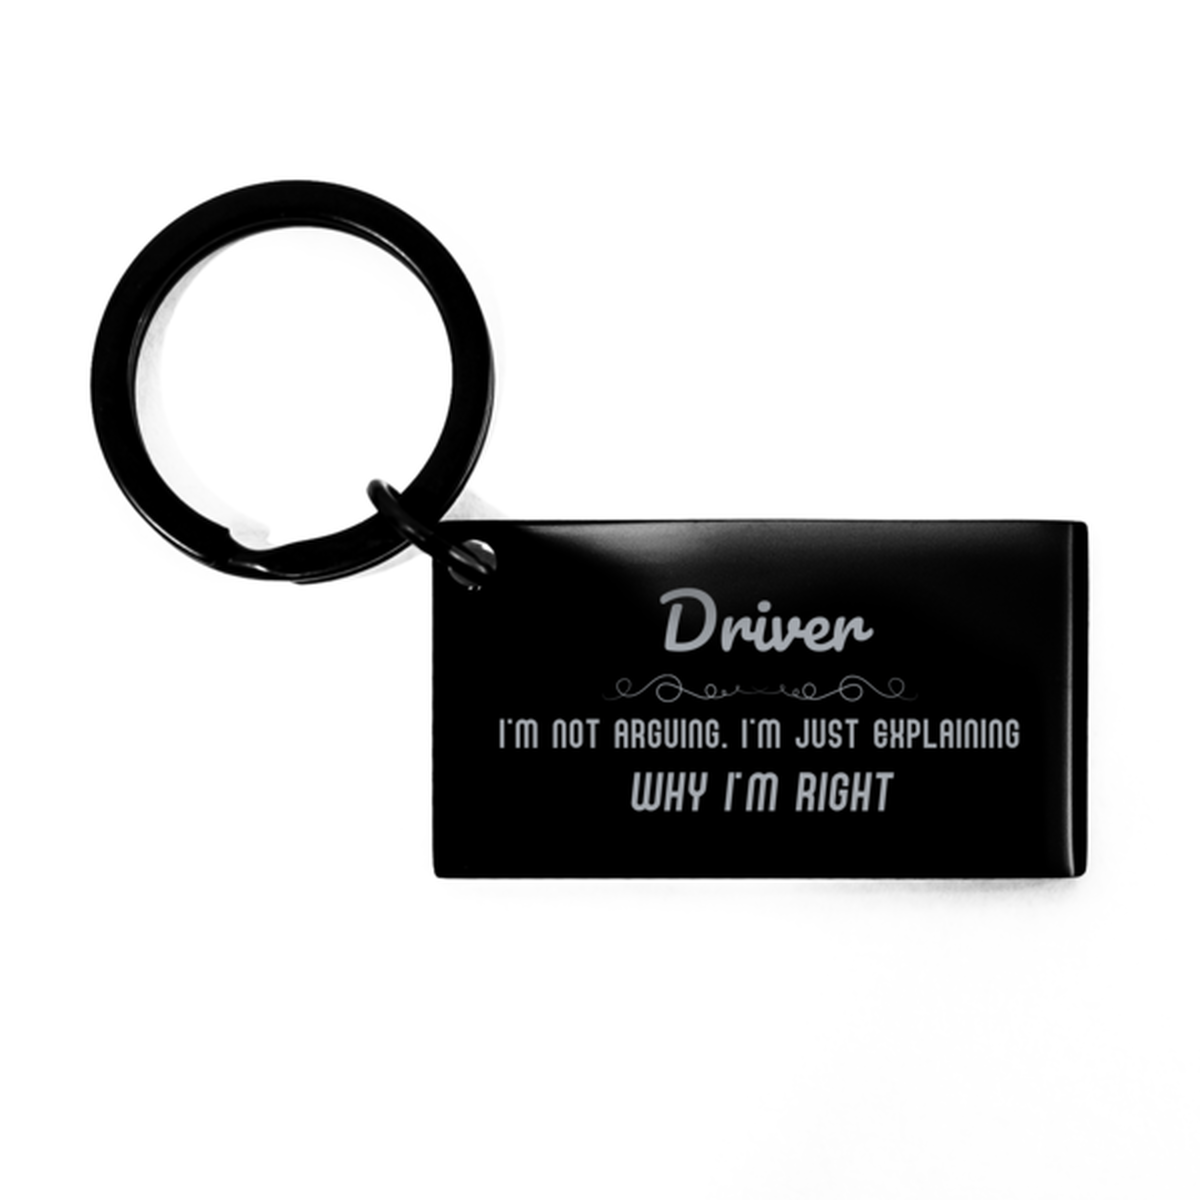 Driver I'm not Arguing. I'm Just Explaining Why I'm RIGHT Keychain, Funny Saying Quote Driver Gifts For Driver Graduation Birthday Christmas Gifts for Men Women Coworker